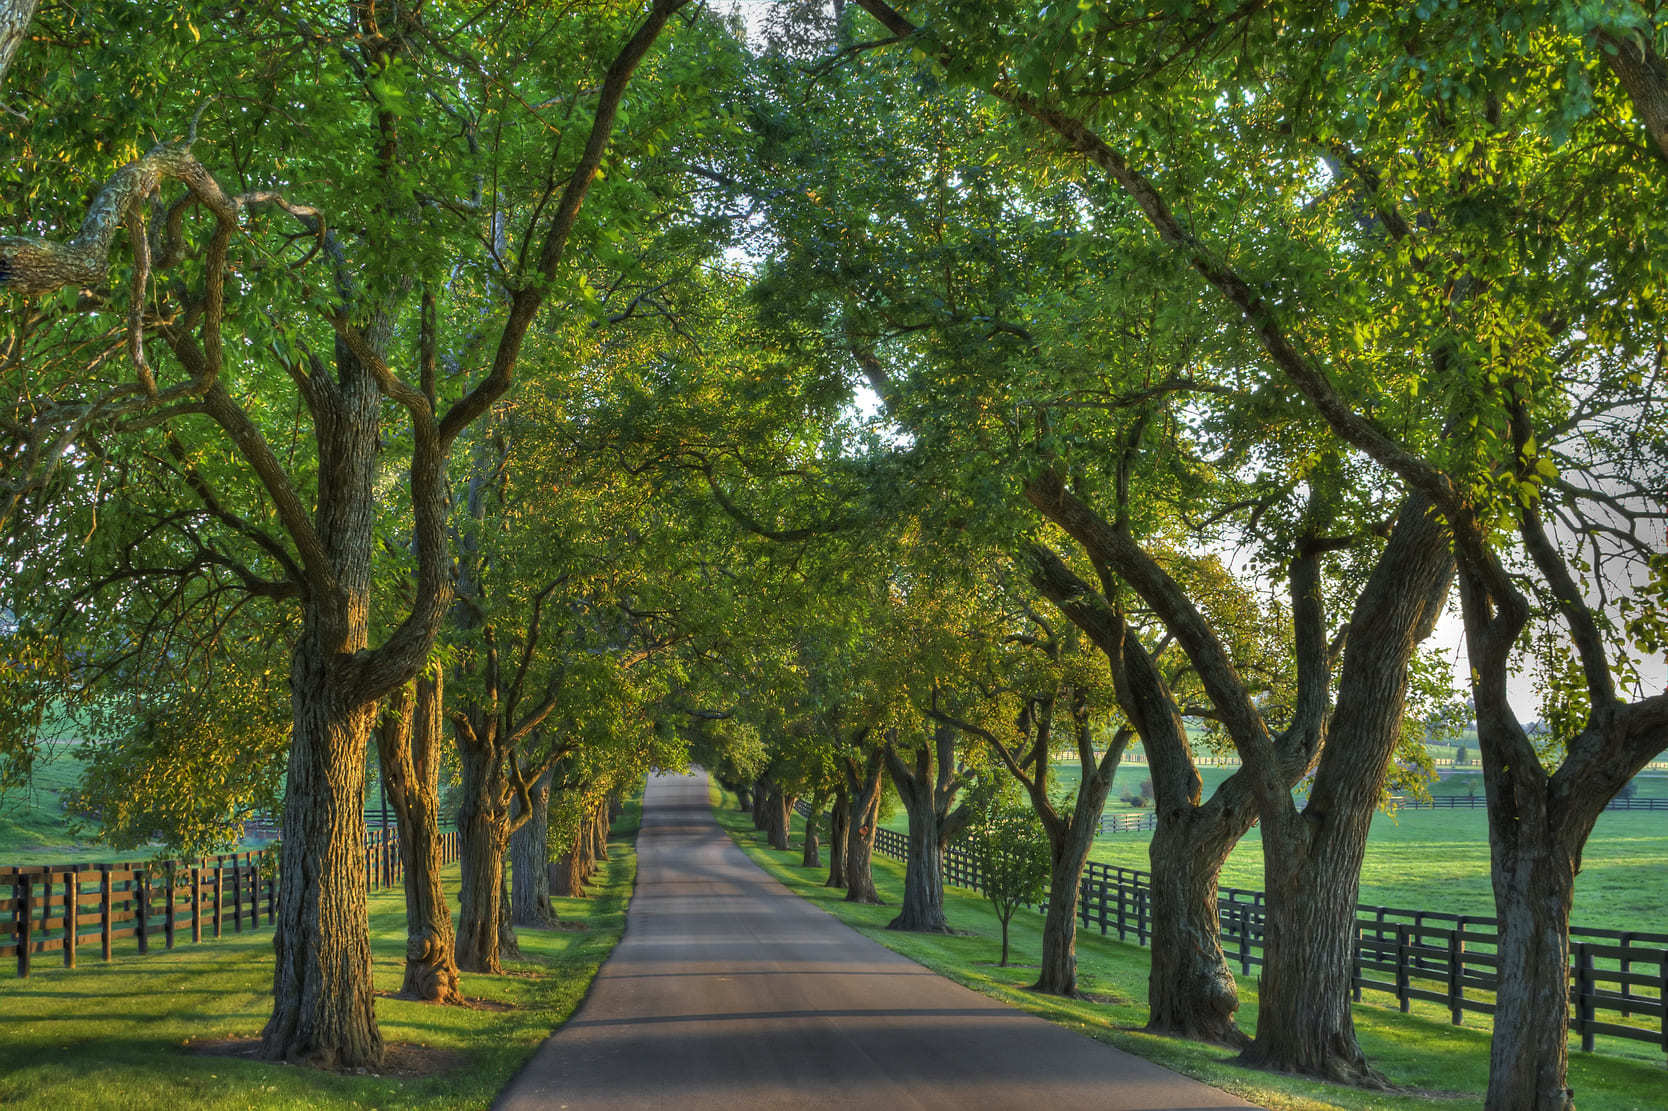 Rural road lined with green trees in Lexington, Kentucky